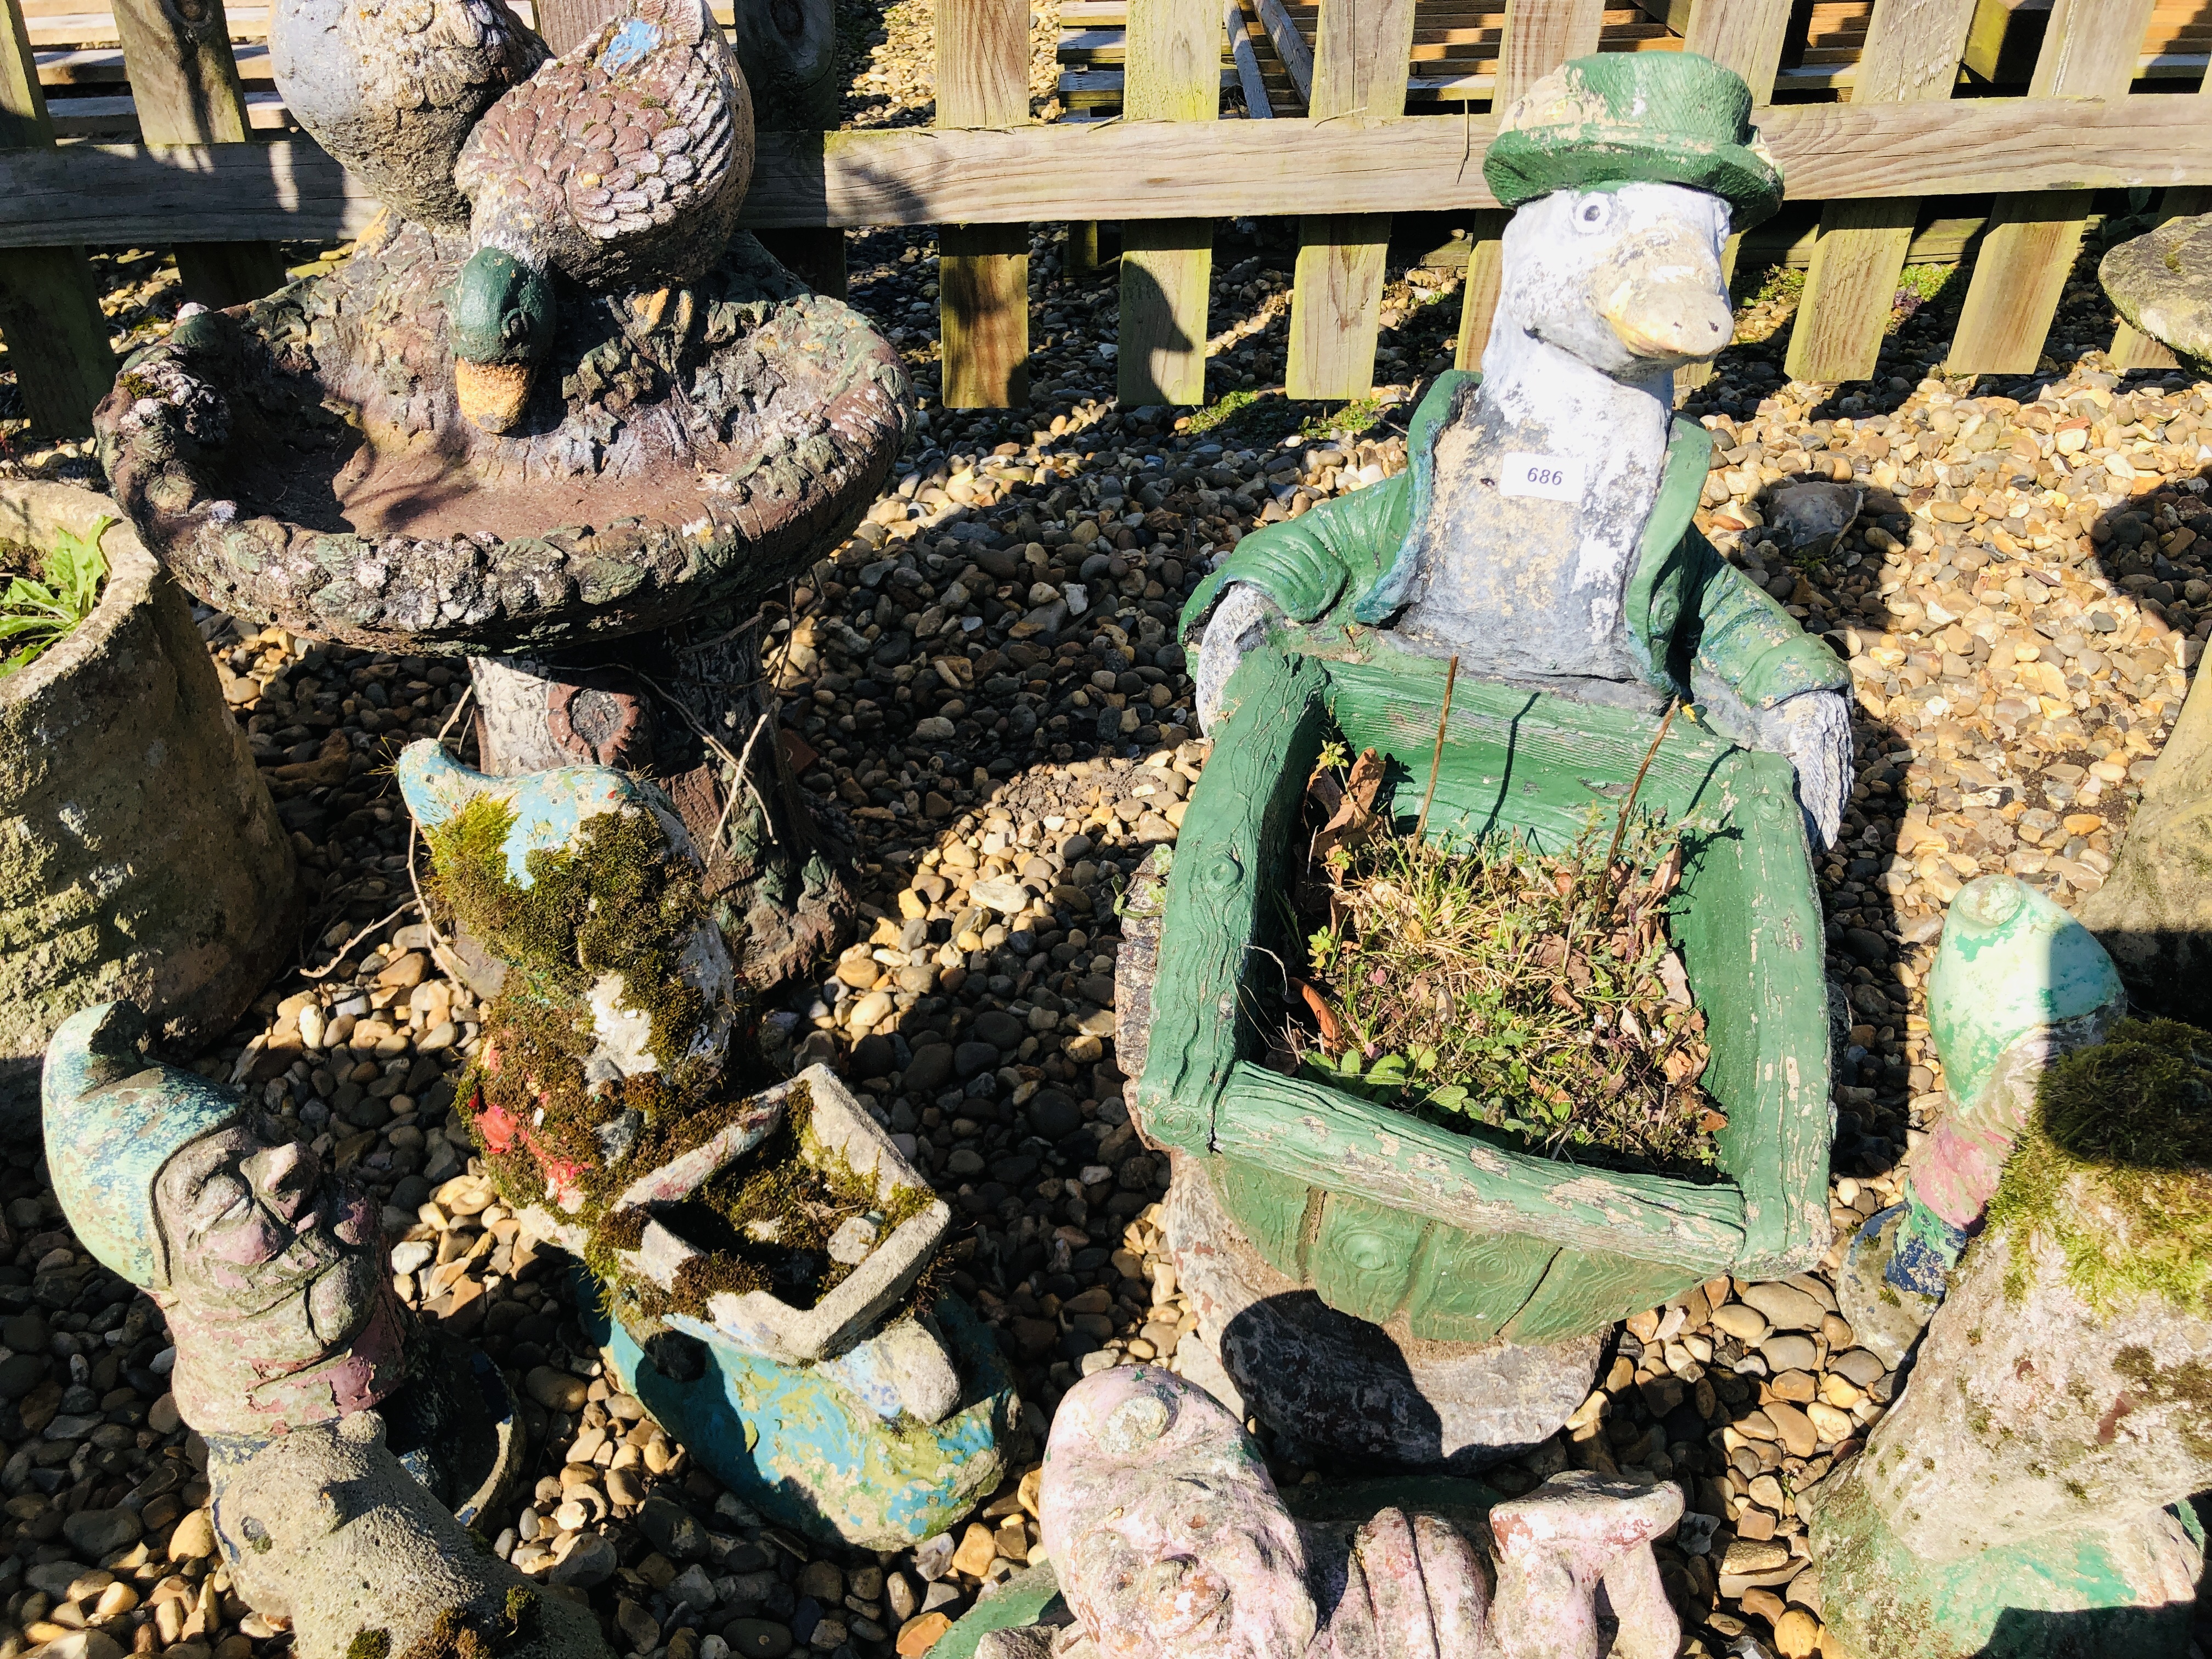 13 GARDEN ORNAMENTS AND PLANTERS TO INCLUDE DUCK WITH WHEEL BARROW, DUCK BIRD BATH. GNOMES. - Image 3 of 5